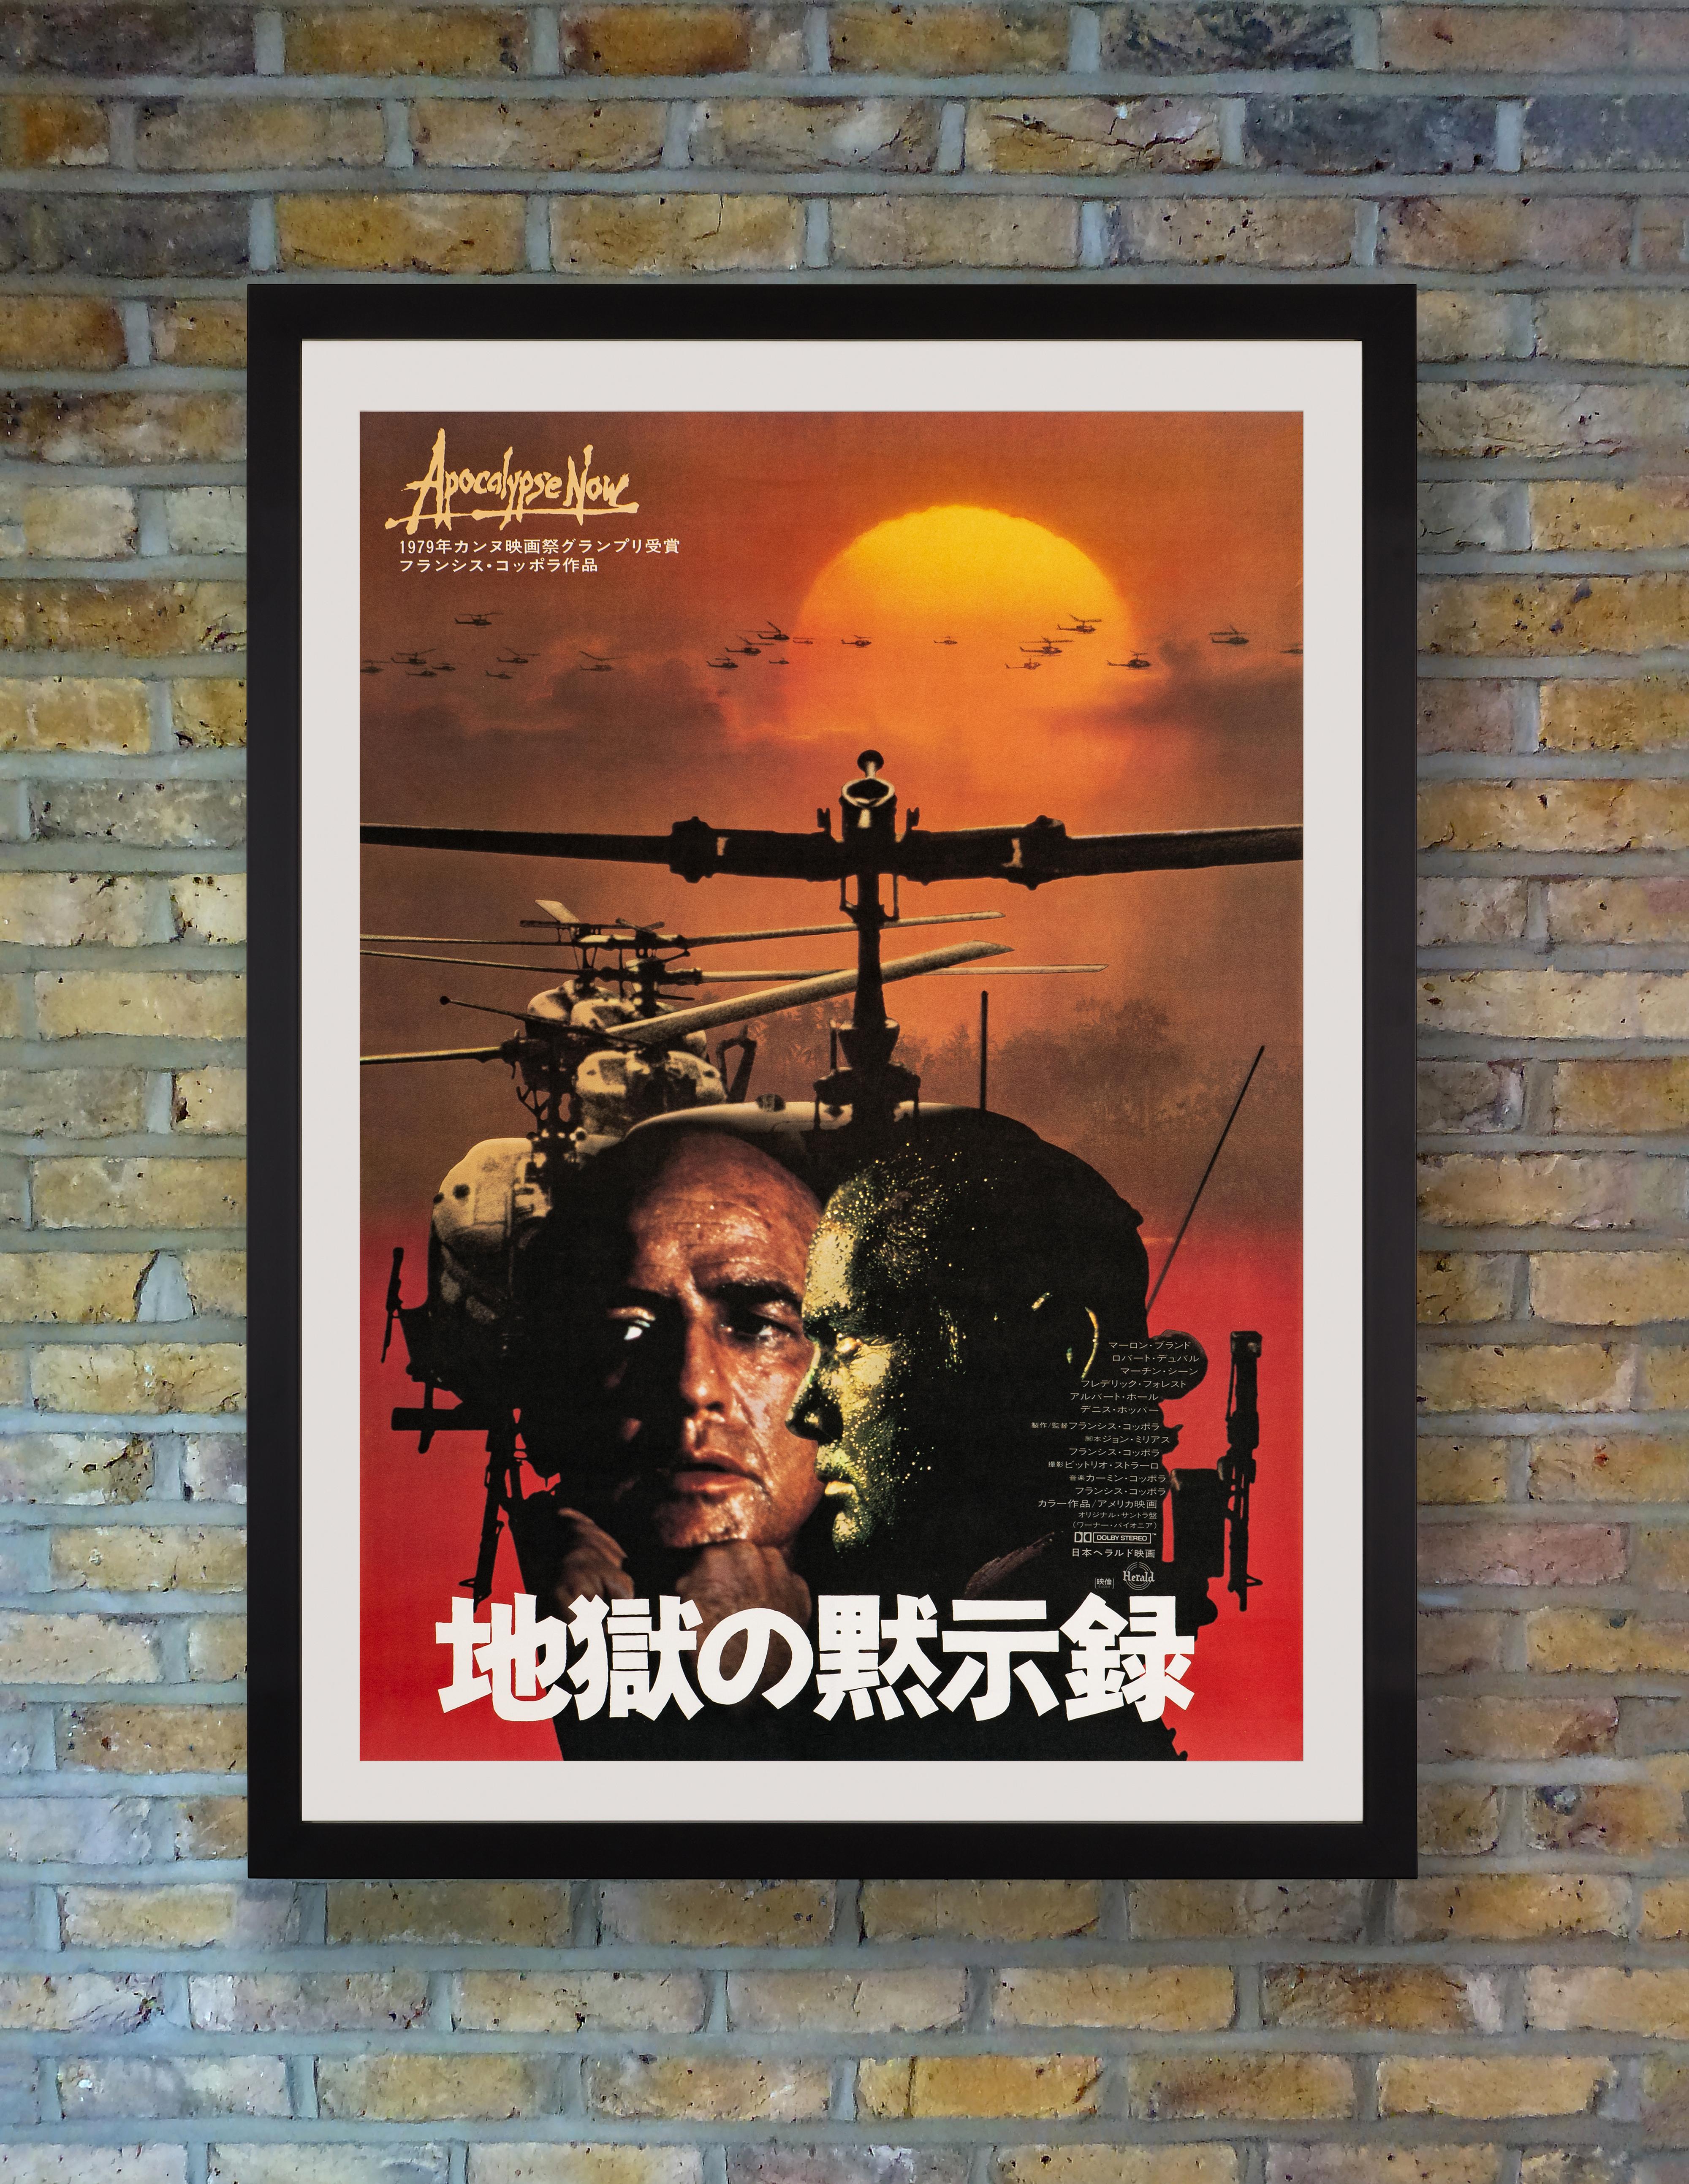 Widely considered one of the best war movies ever made, Francis Ford Coppola's 1979 Vietnam War epic 'Apocalypse Now' follows Martin Sheen's US Army Captain as he journeys up the Nung River from South Vietnam into Cambodia on a mission to